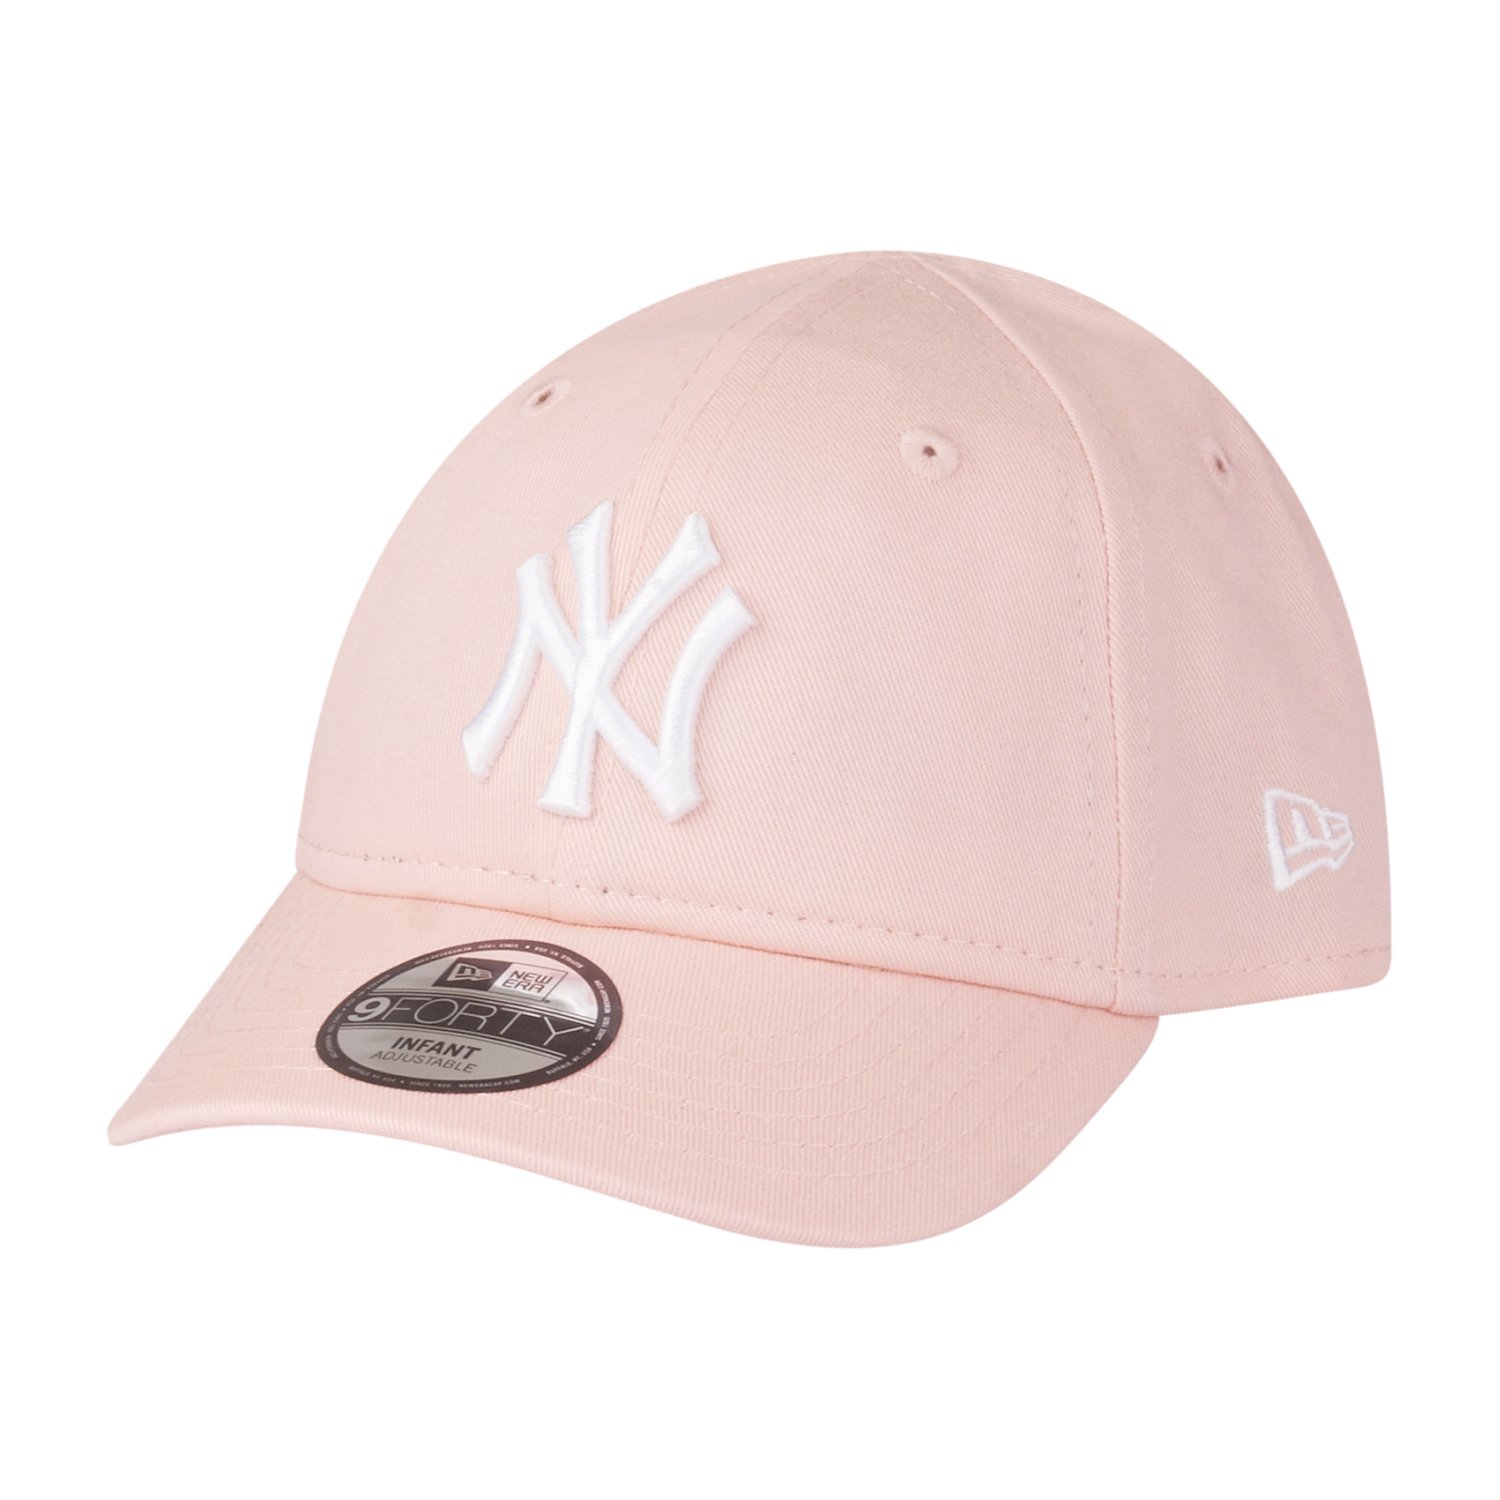 New Era 9Forty KINDER Infant Baby Cap NY Yankees weiß 